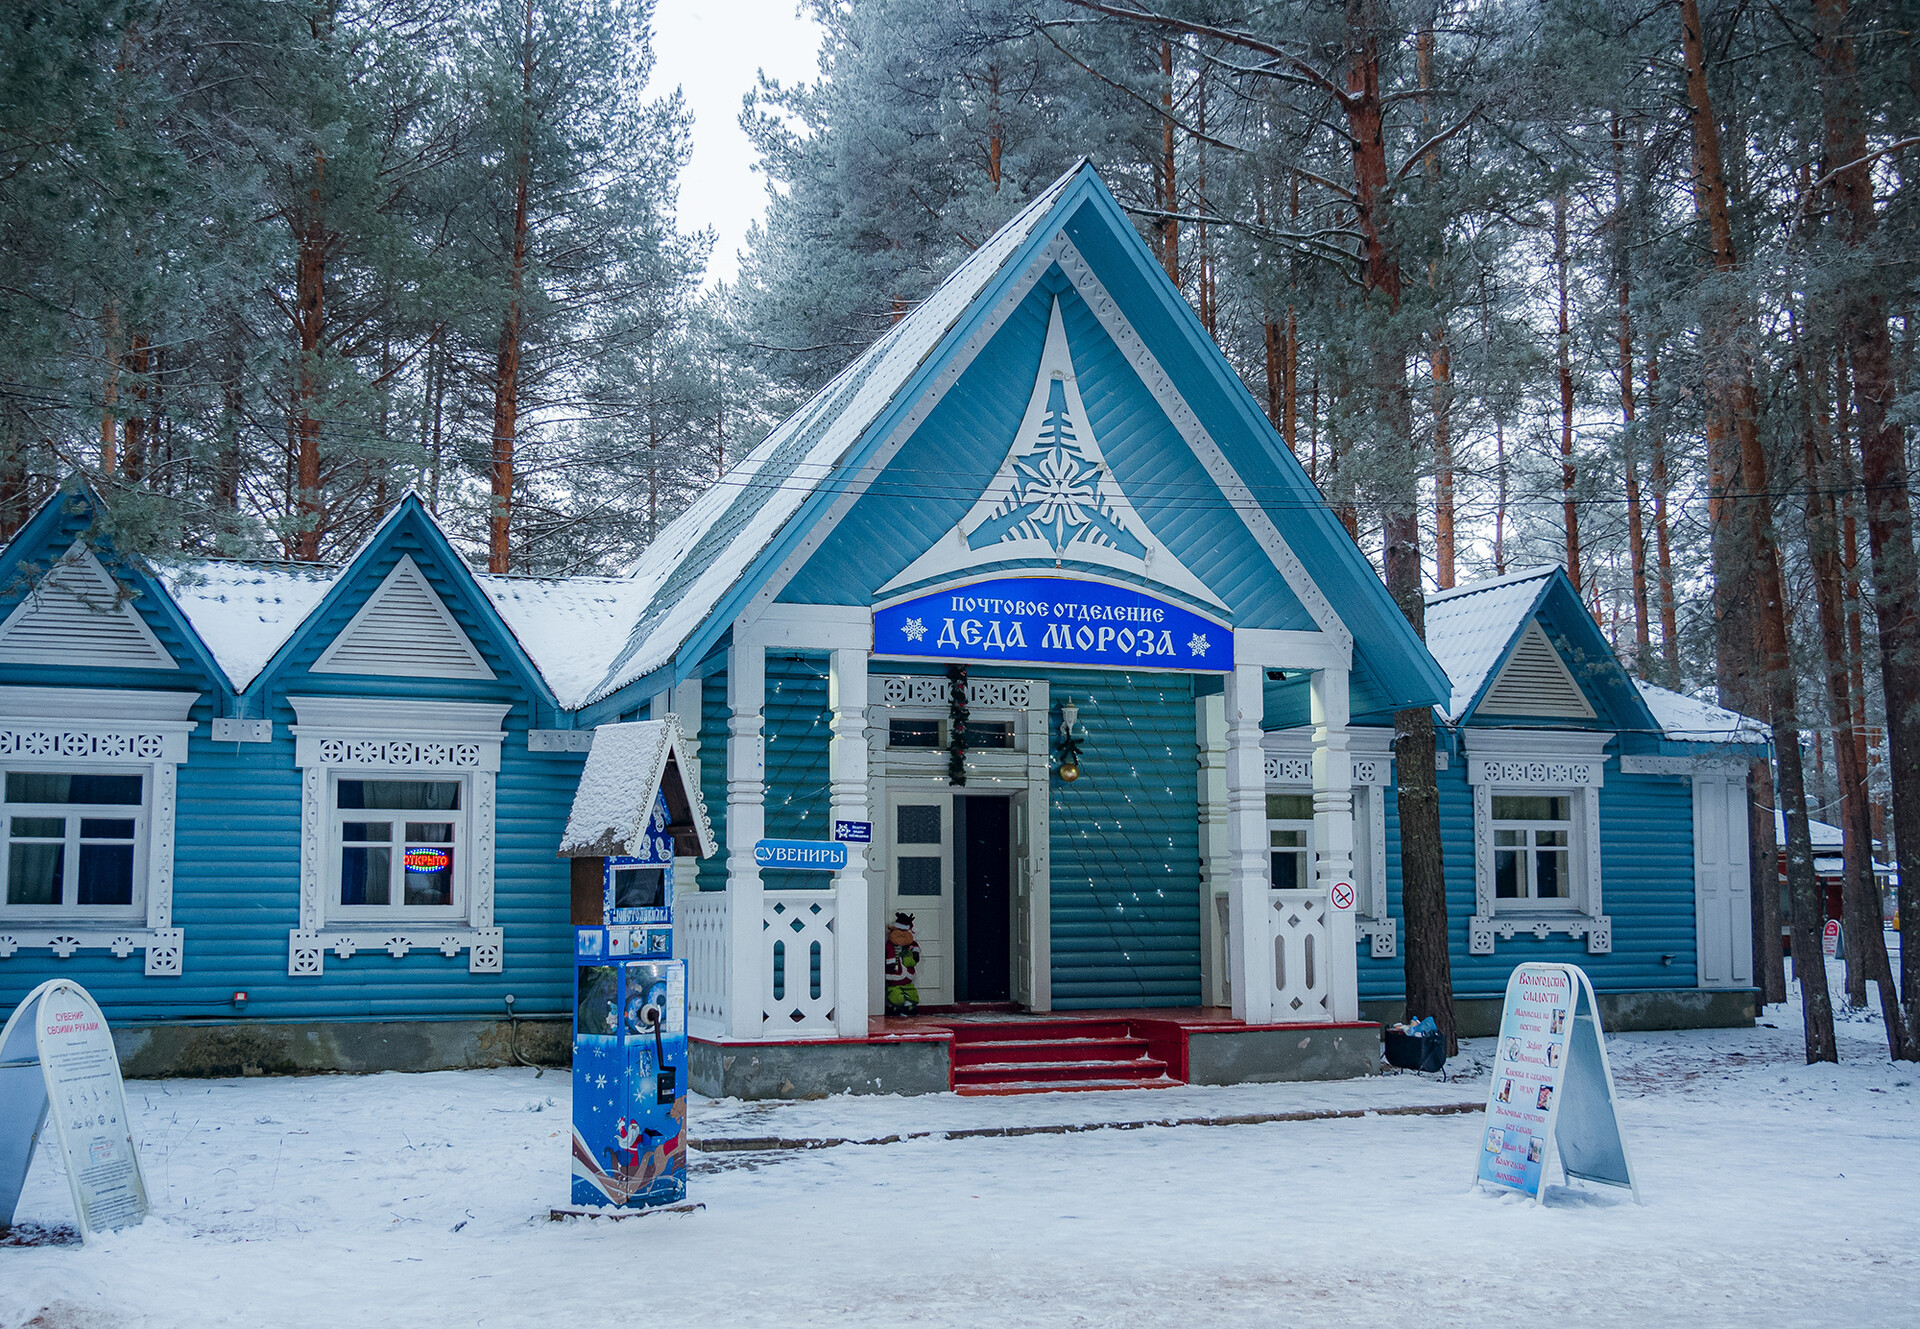 A post office on the Ded Moroz domain where letters are kept.